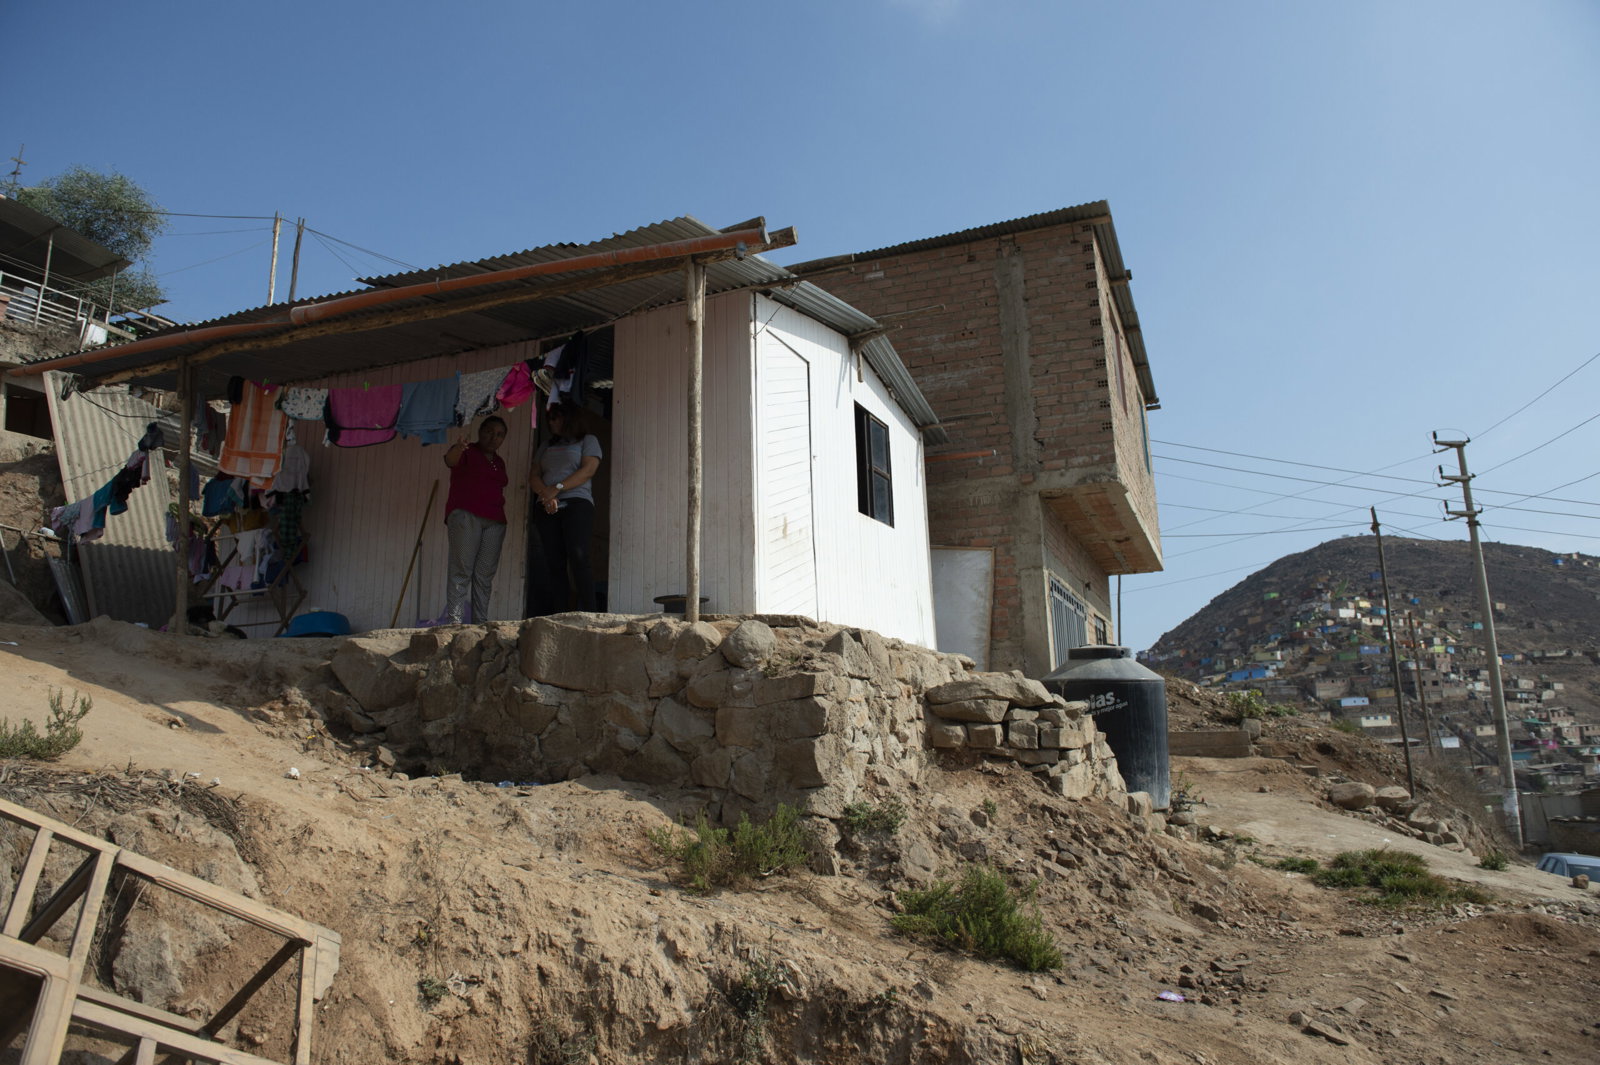 a shack on a hill in lima, peru.